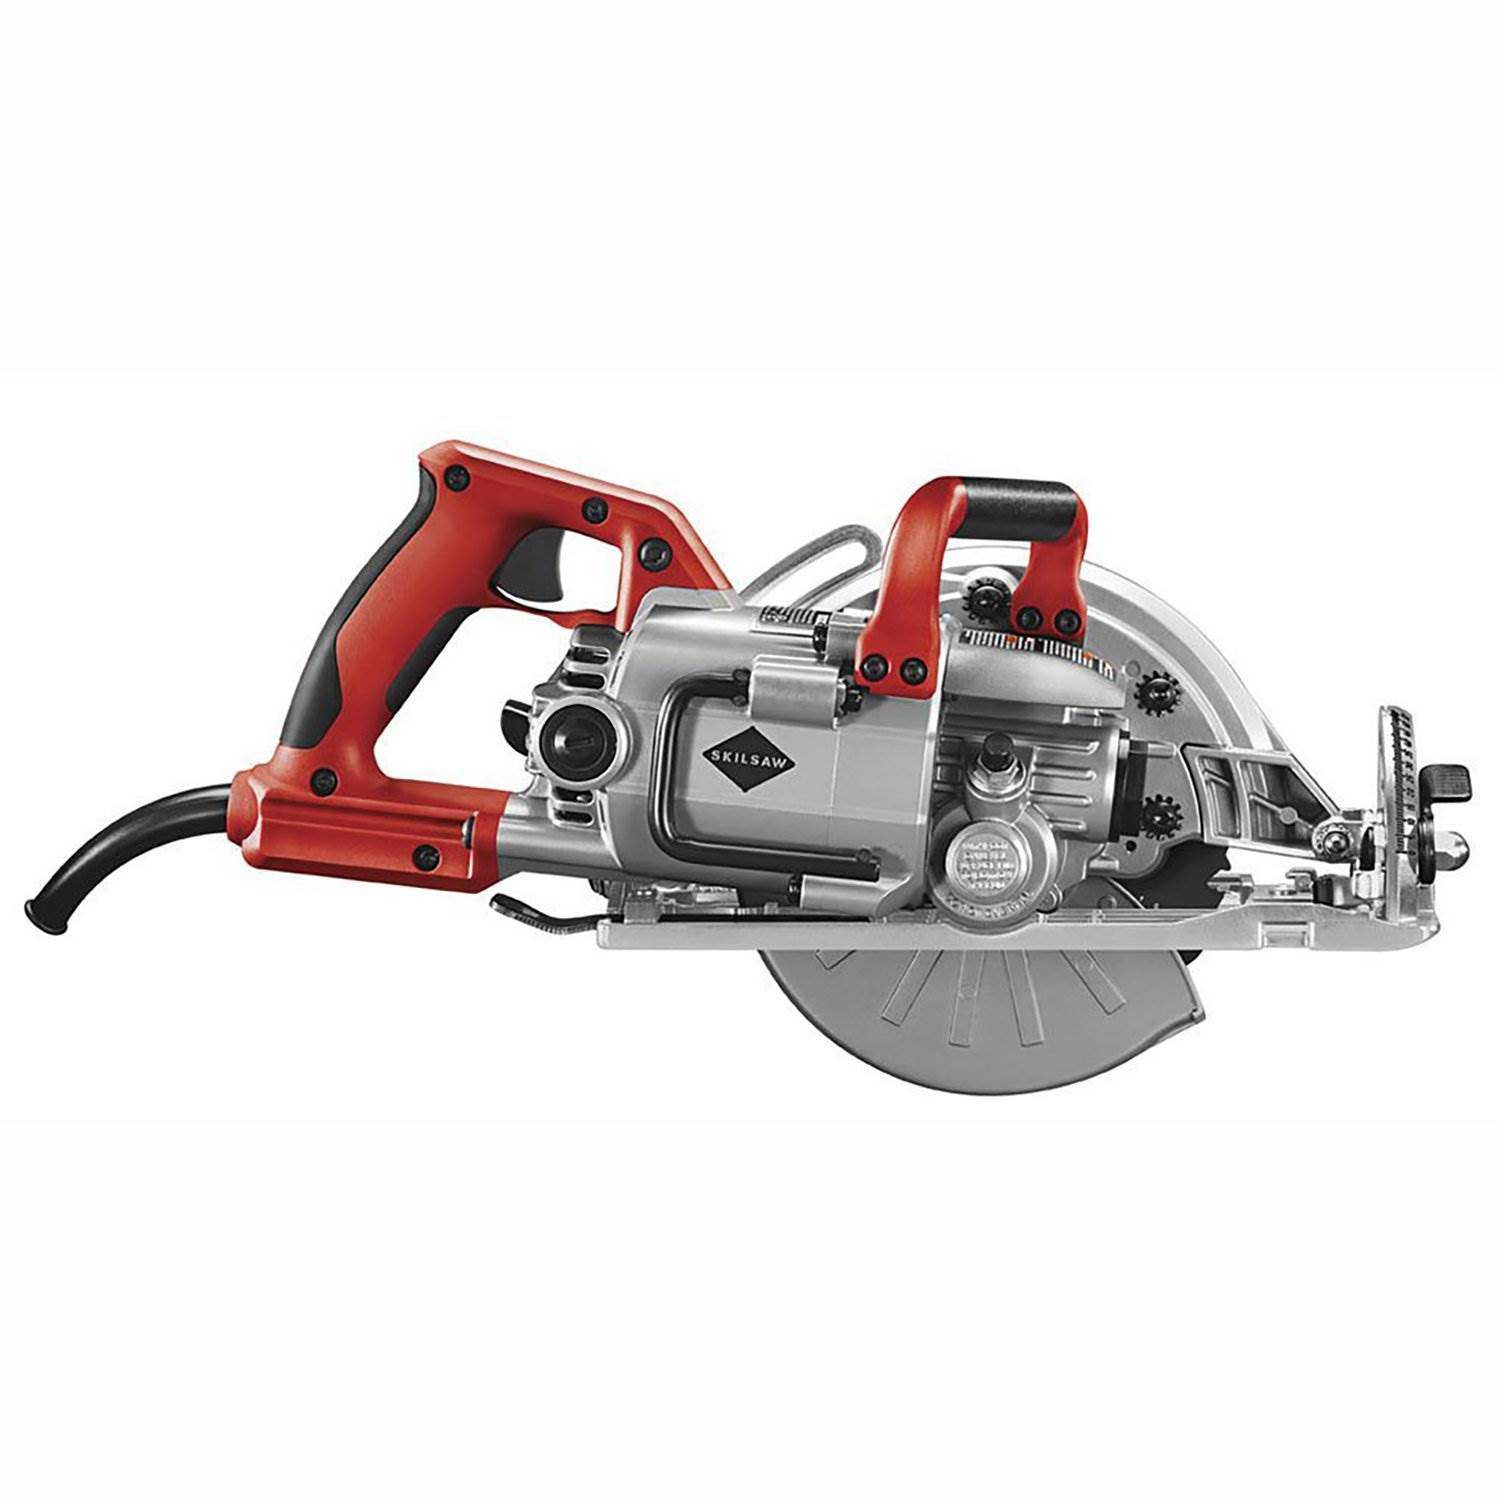 SKIL SPT77WML-01 7-1/4" Lightweight 15Amp Corded Magnesium Worm Drive Circular Saw - image 3 of 7